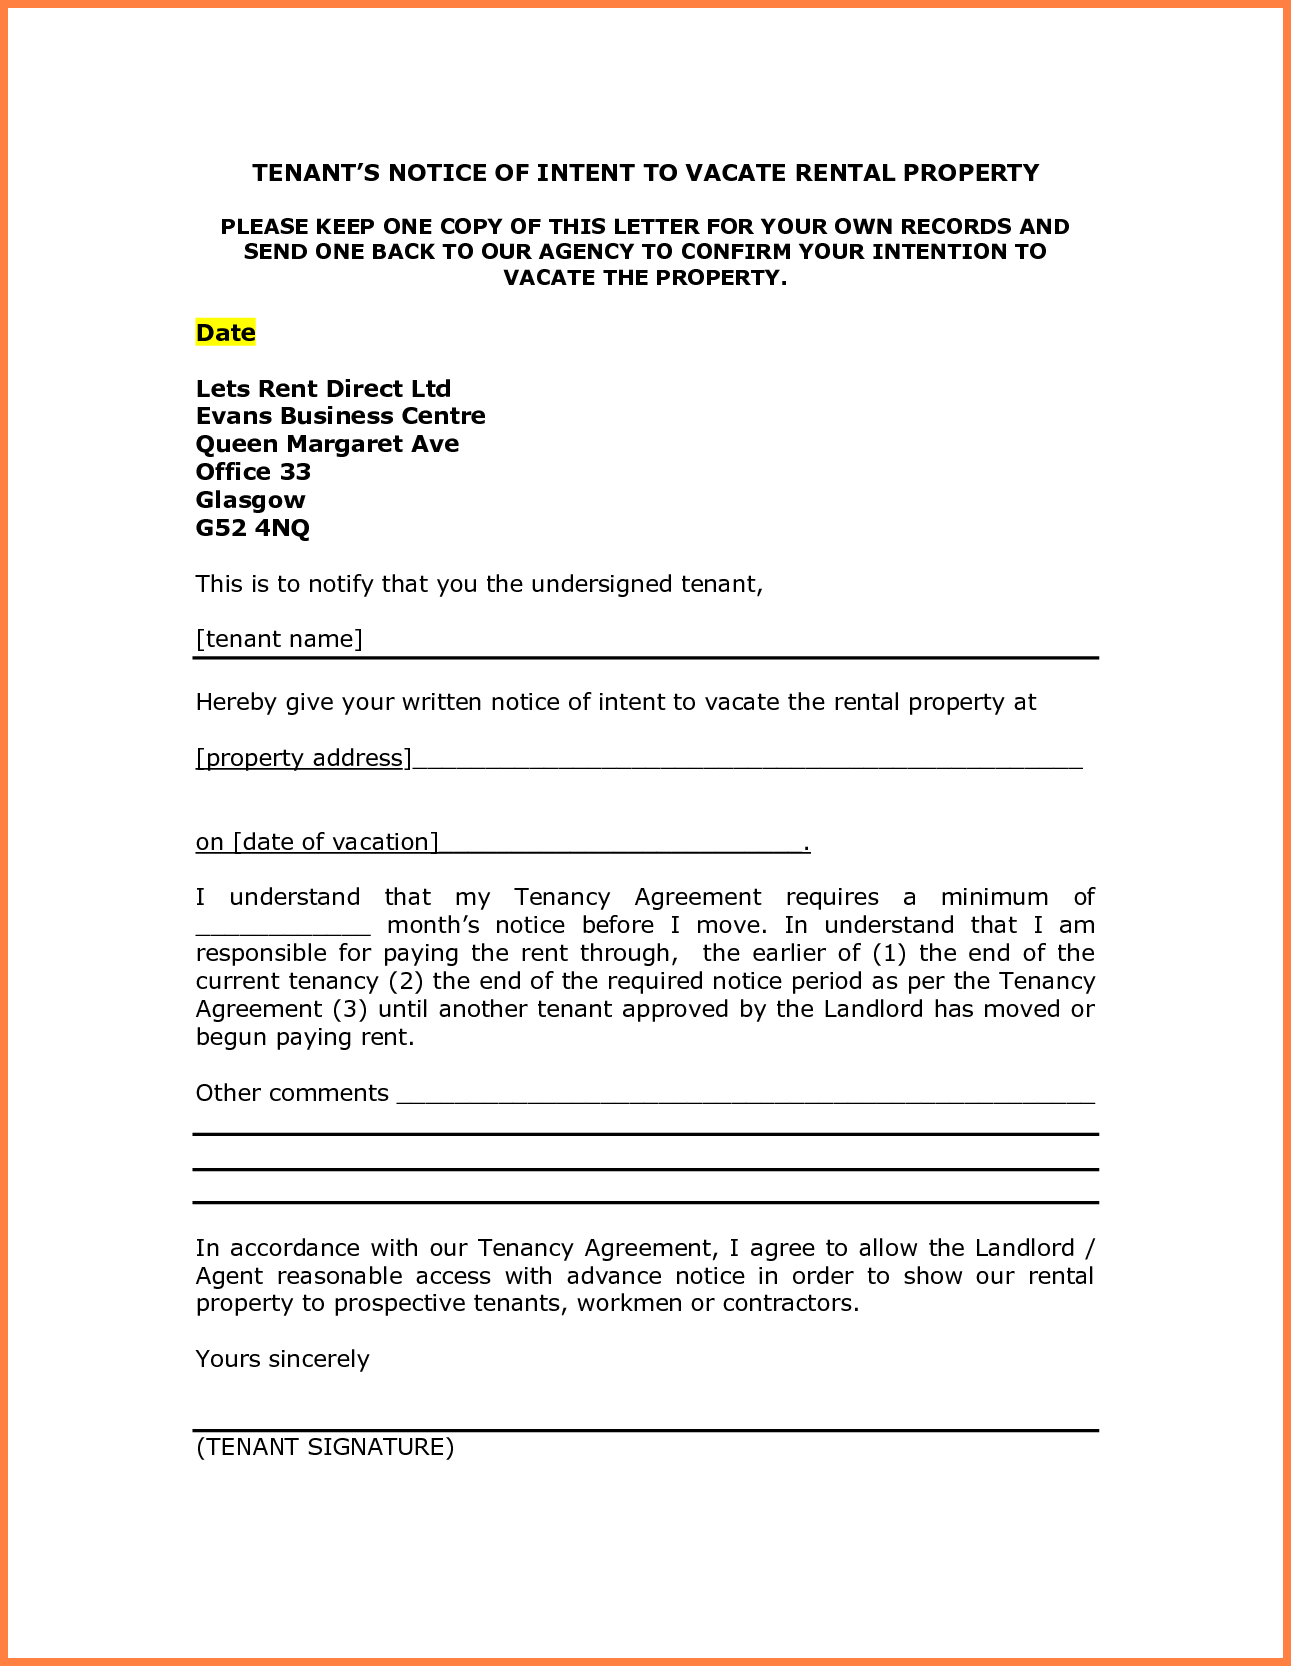 Notice to Vacate Letter to Tenant Template - Letter Intent to Move Sample Notice Vacate Tenant Rentaloperty